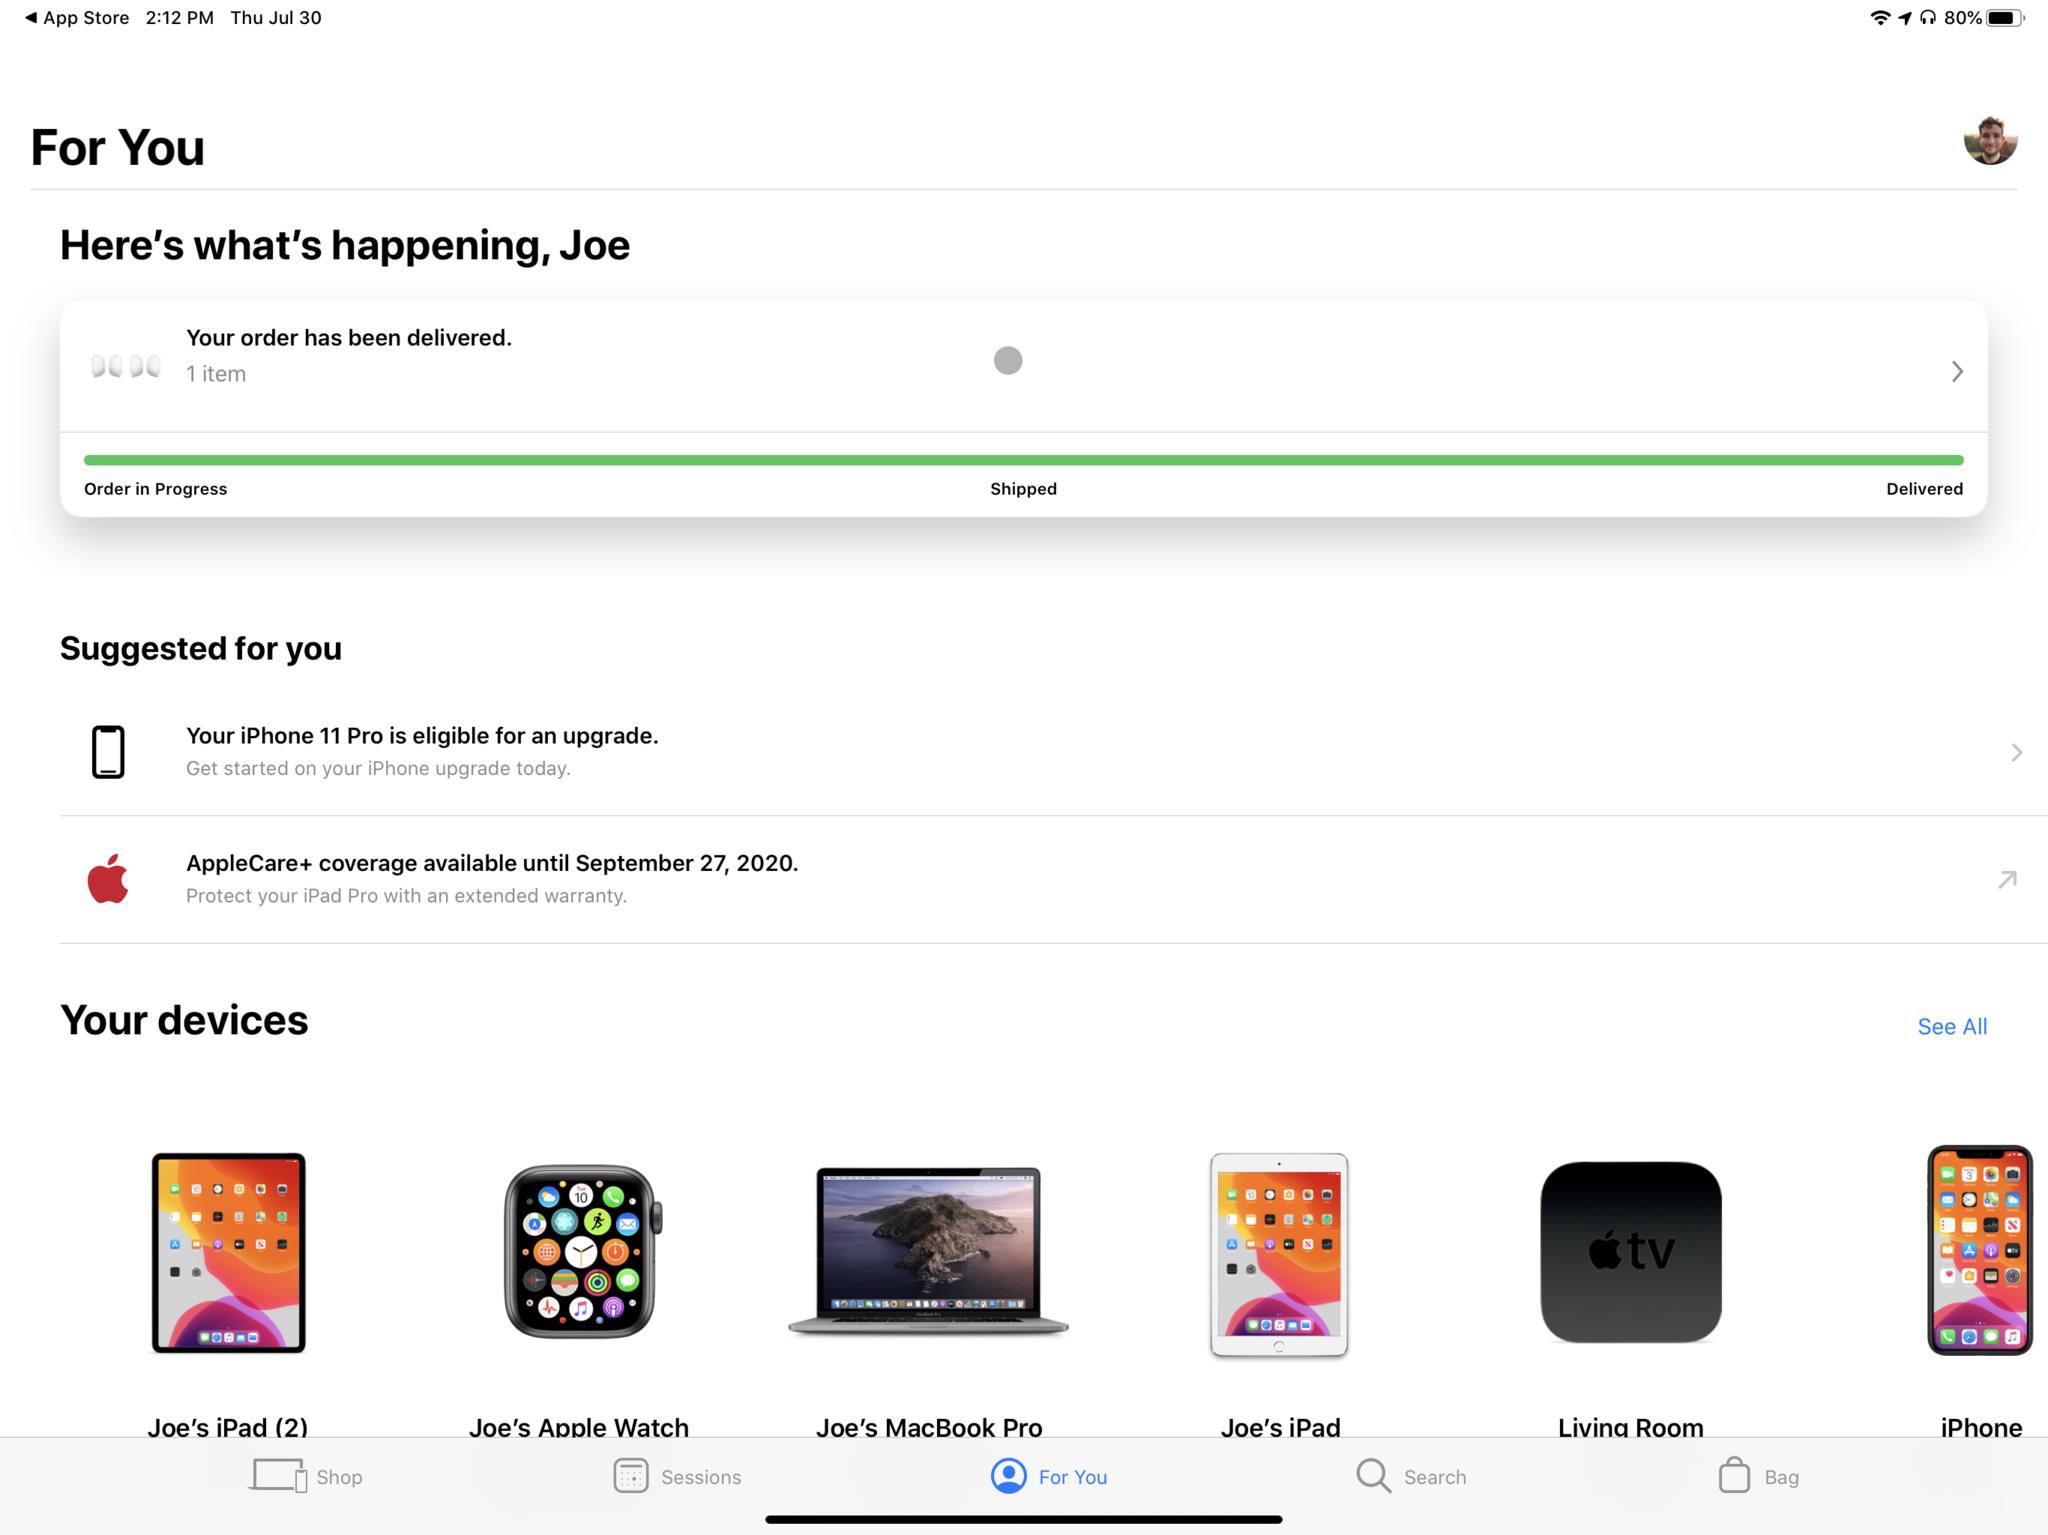 Apple Store App For You Tab